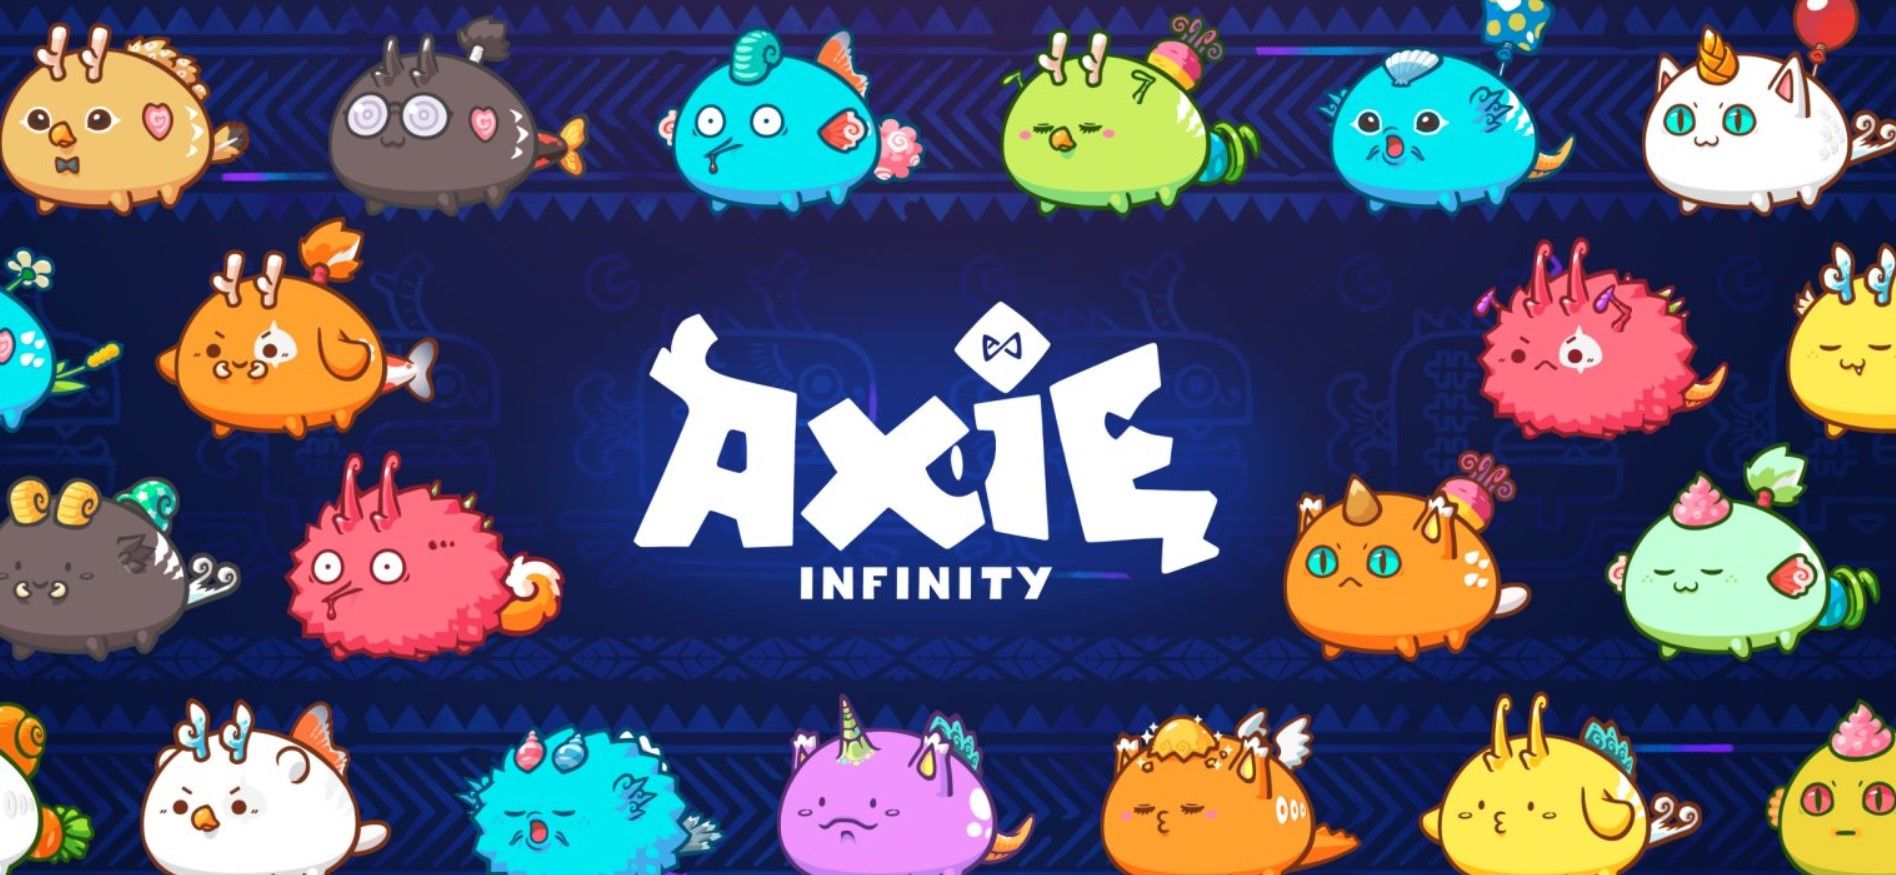 axie infinity is a collecting game